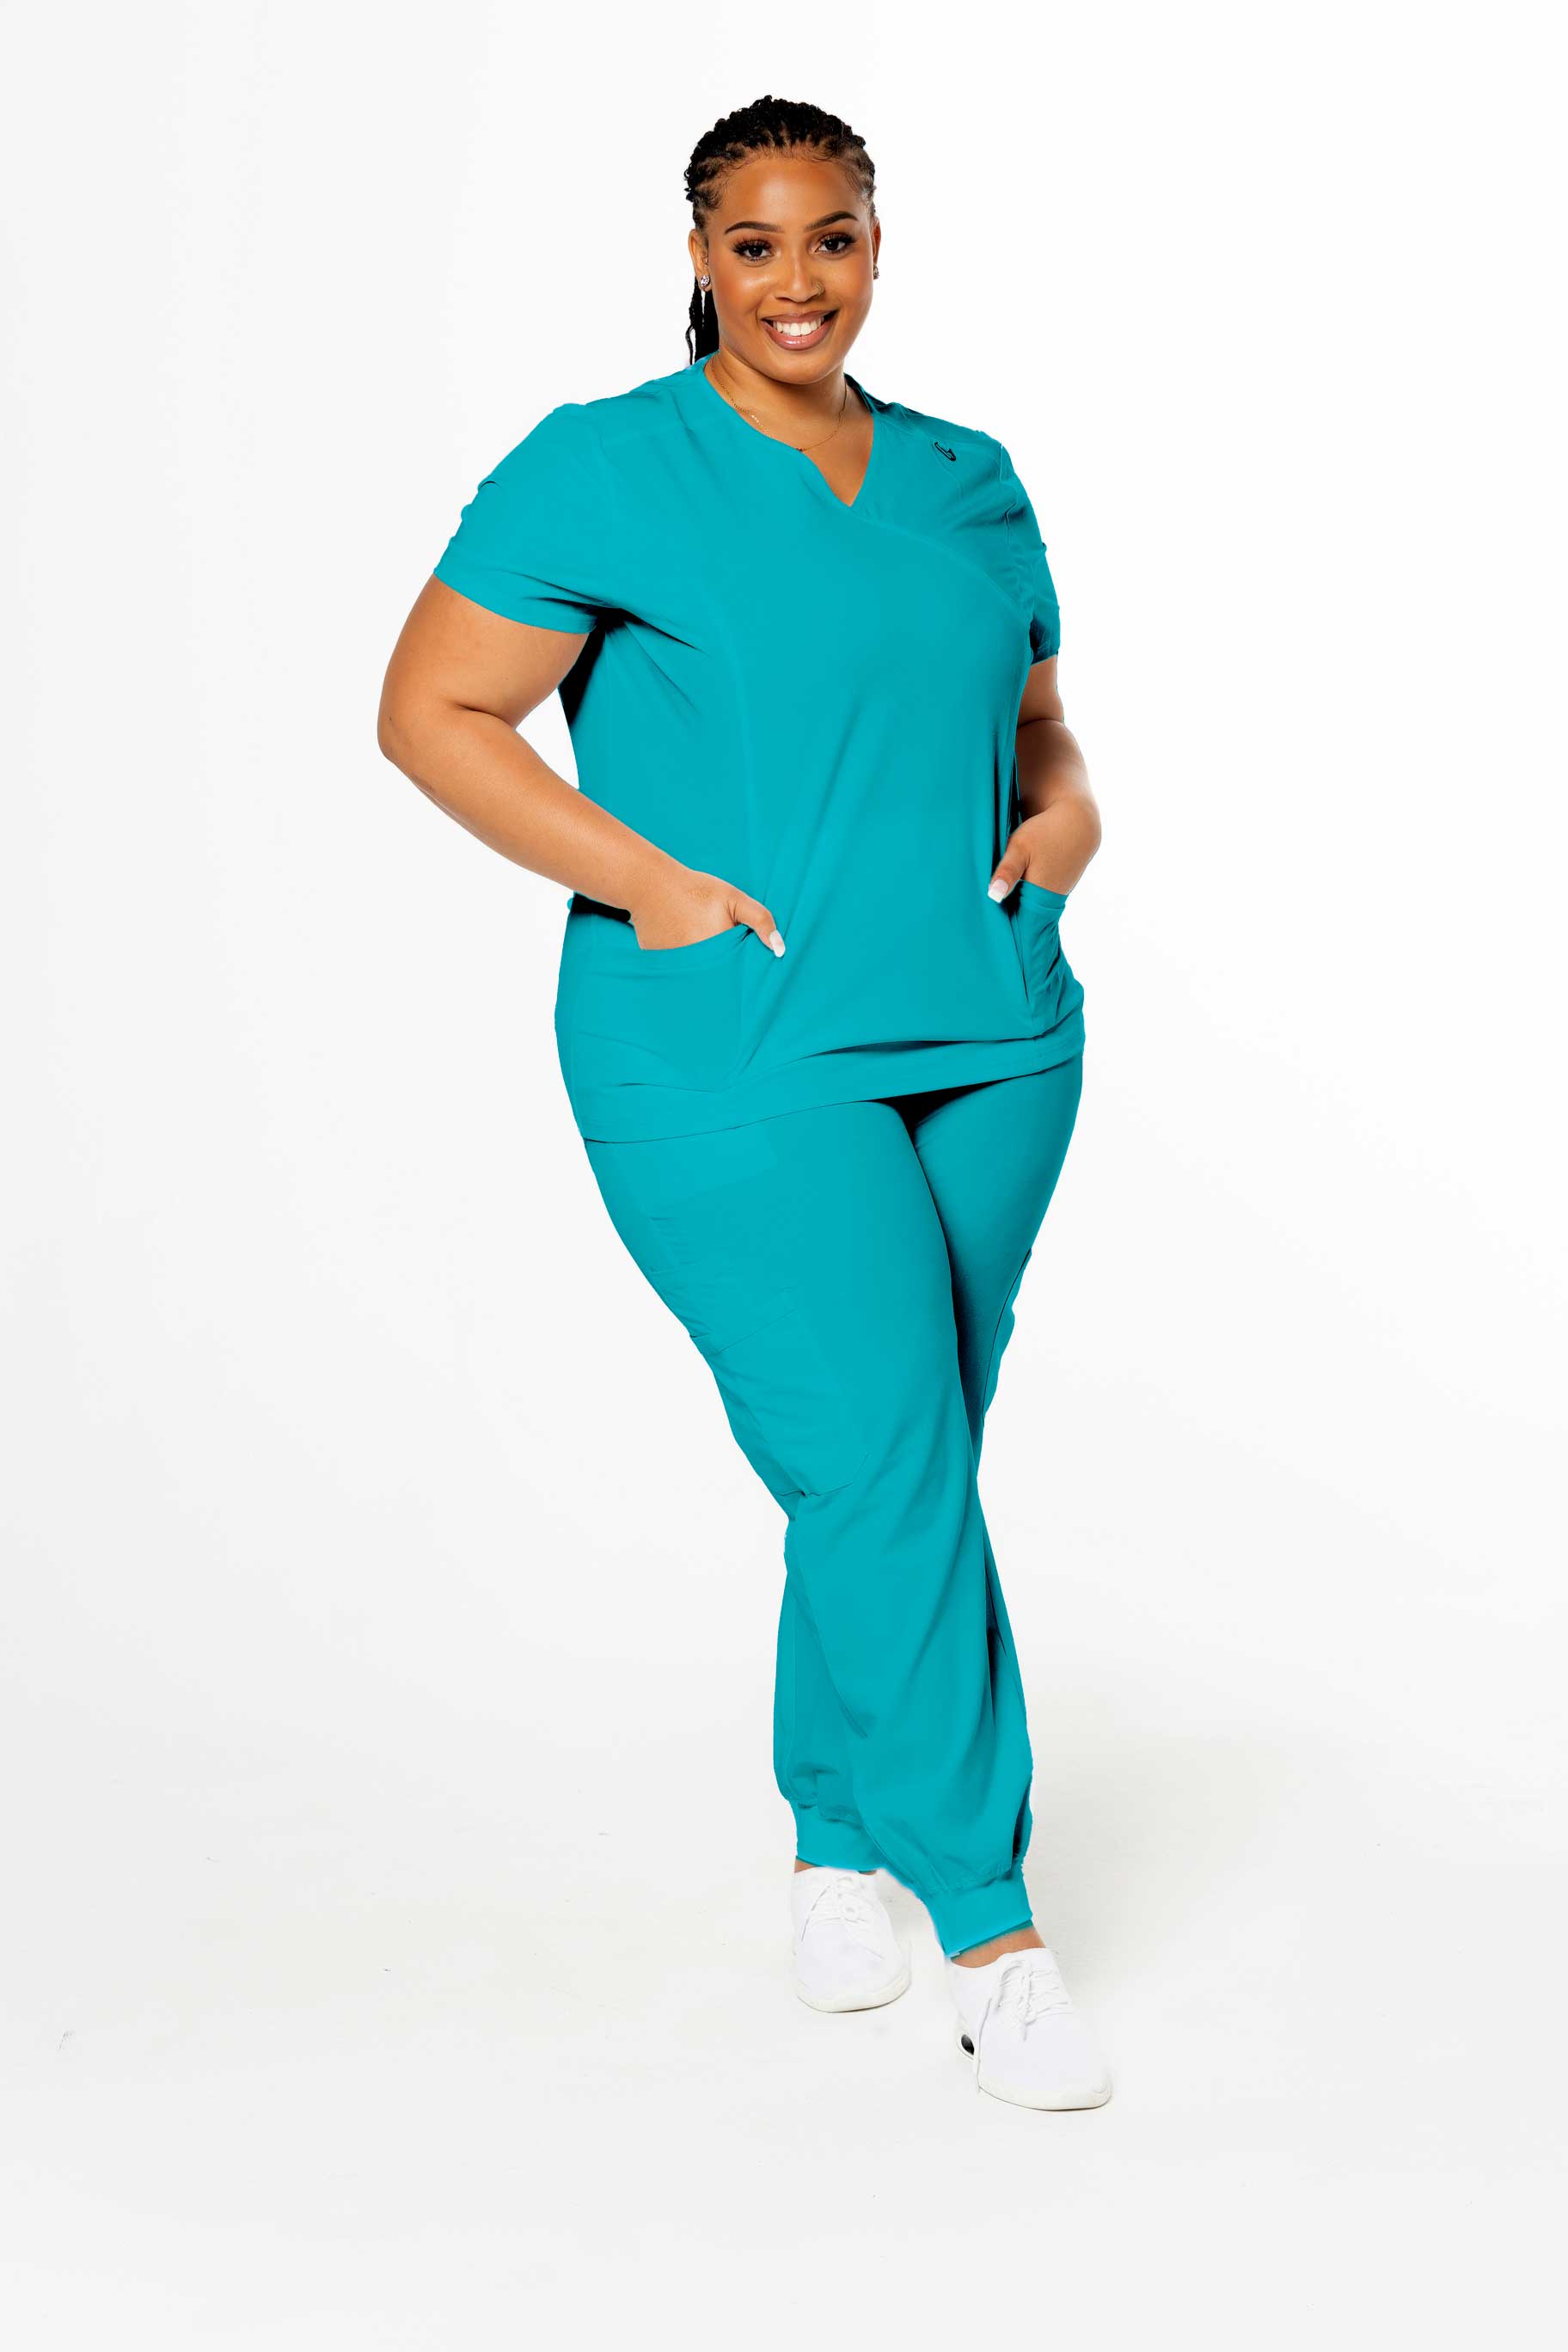 PURCHASE A SAMPLE SET (MATCHING TOP AND BOTTOM) - THE CSCRUBS CLASSIC COLLECTION